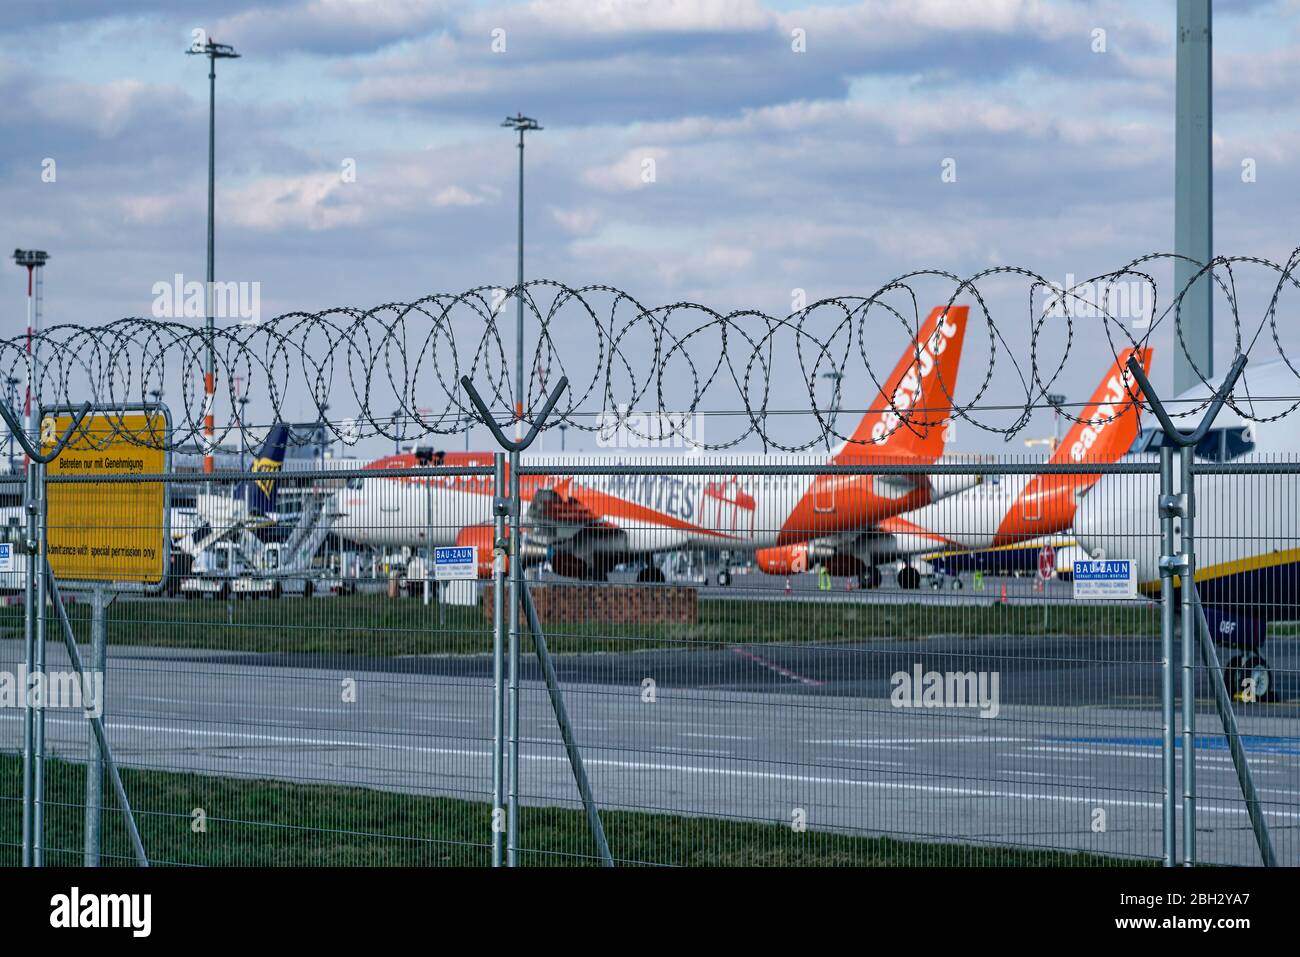 Easy Jet Airplanes parking at Airport Schoenefeld during Corona Crises, Berlin, Germany Stock Photo